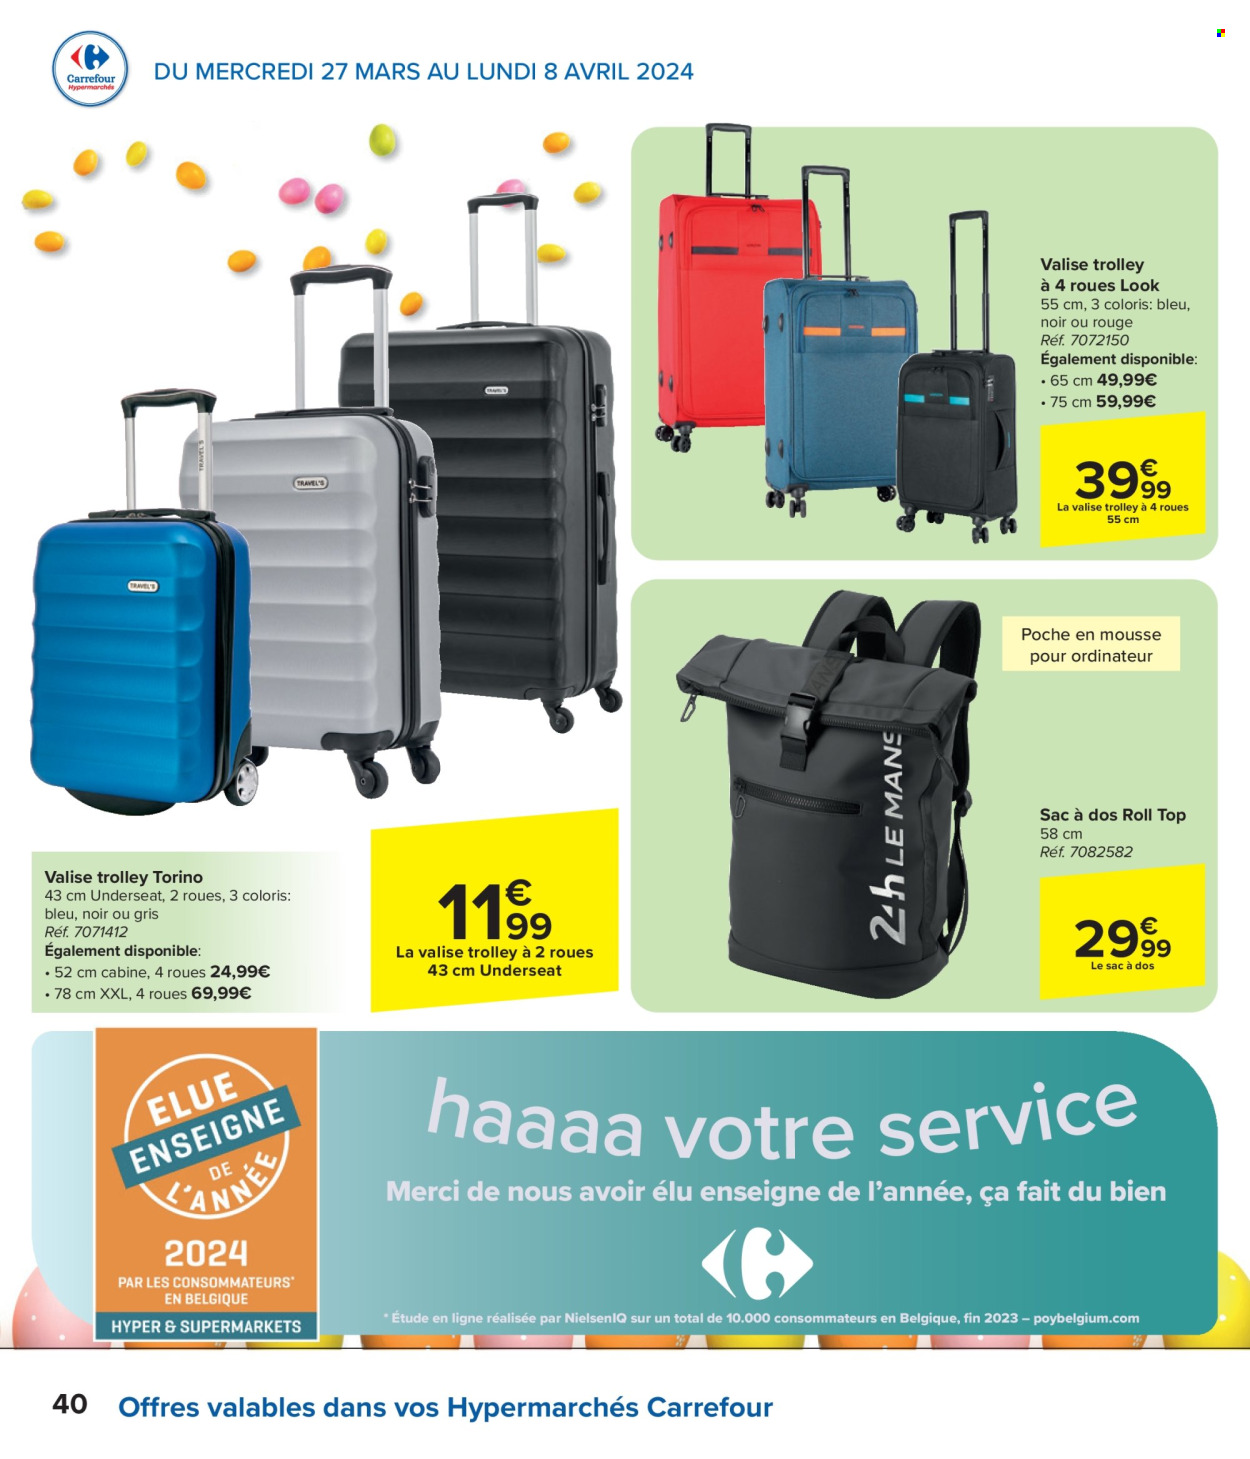 Catalogue Carrefour hypermarkt - 27.3.2024 - 8.4.2024. Page 40.